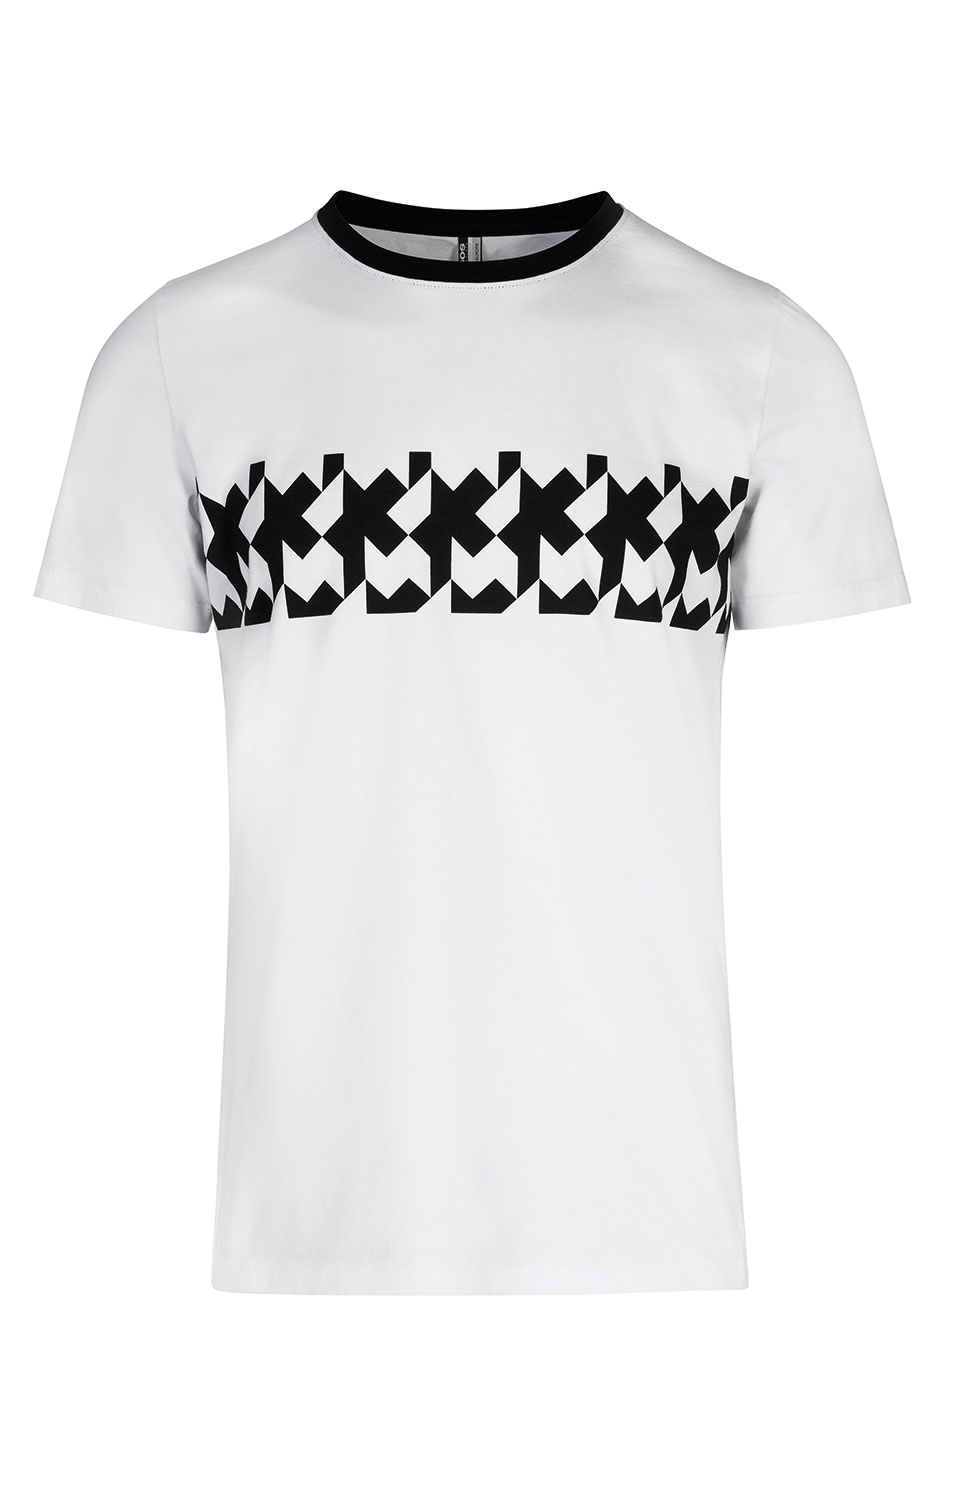 Assos RS Griffe T-Shirt | R&A Cycles